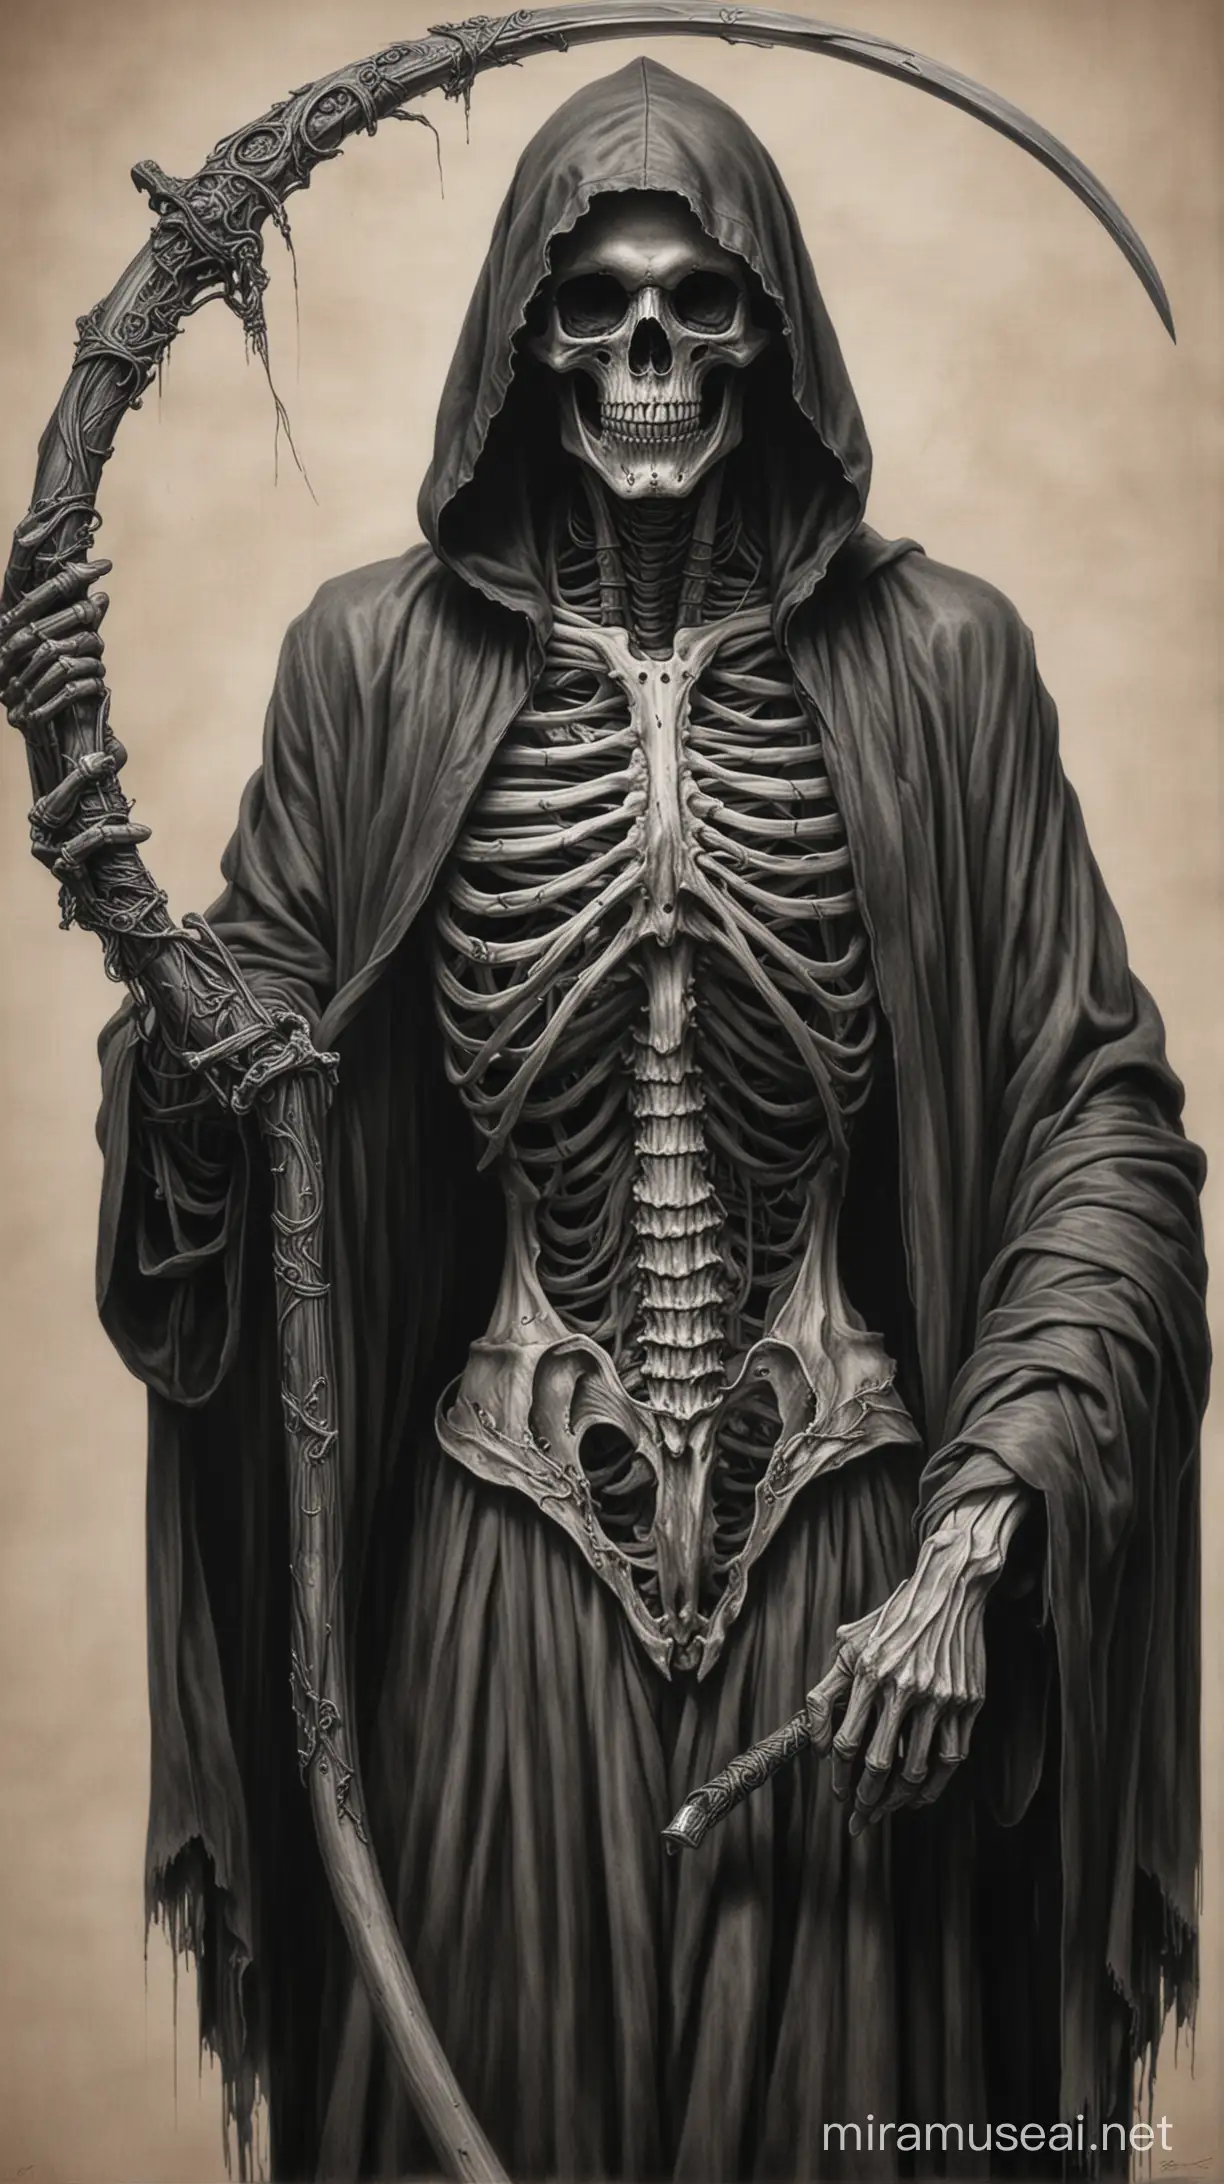 Grim Reaper Realism Drawing Hooded Figure with Scythe and Exposed Skeleton Ribcage